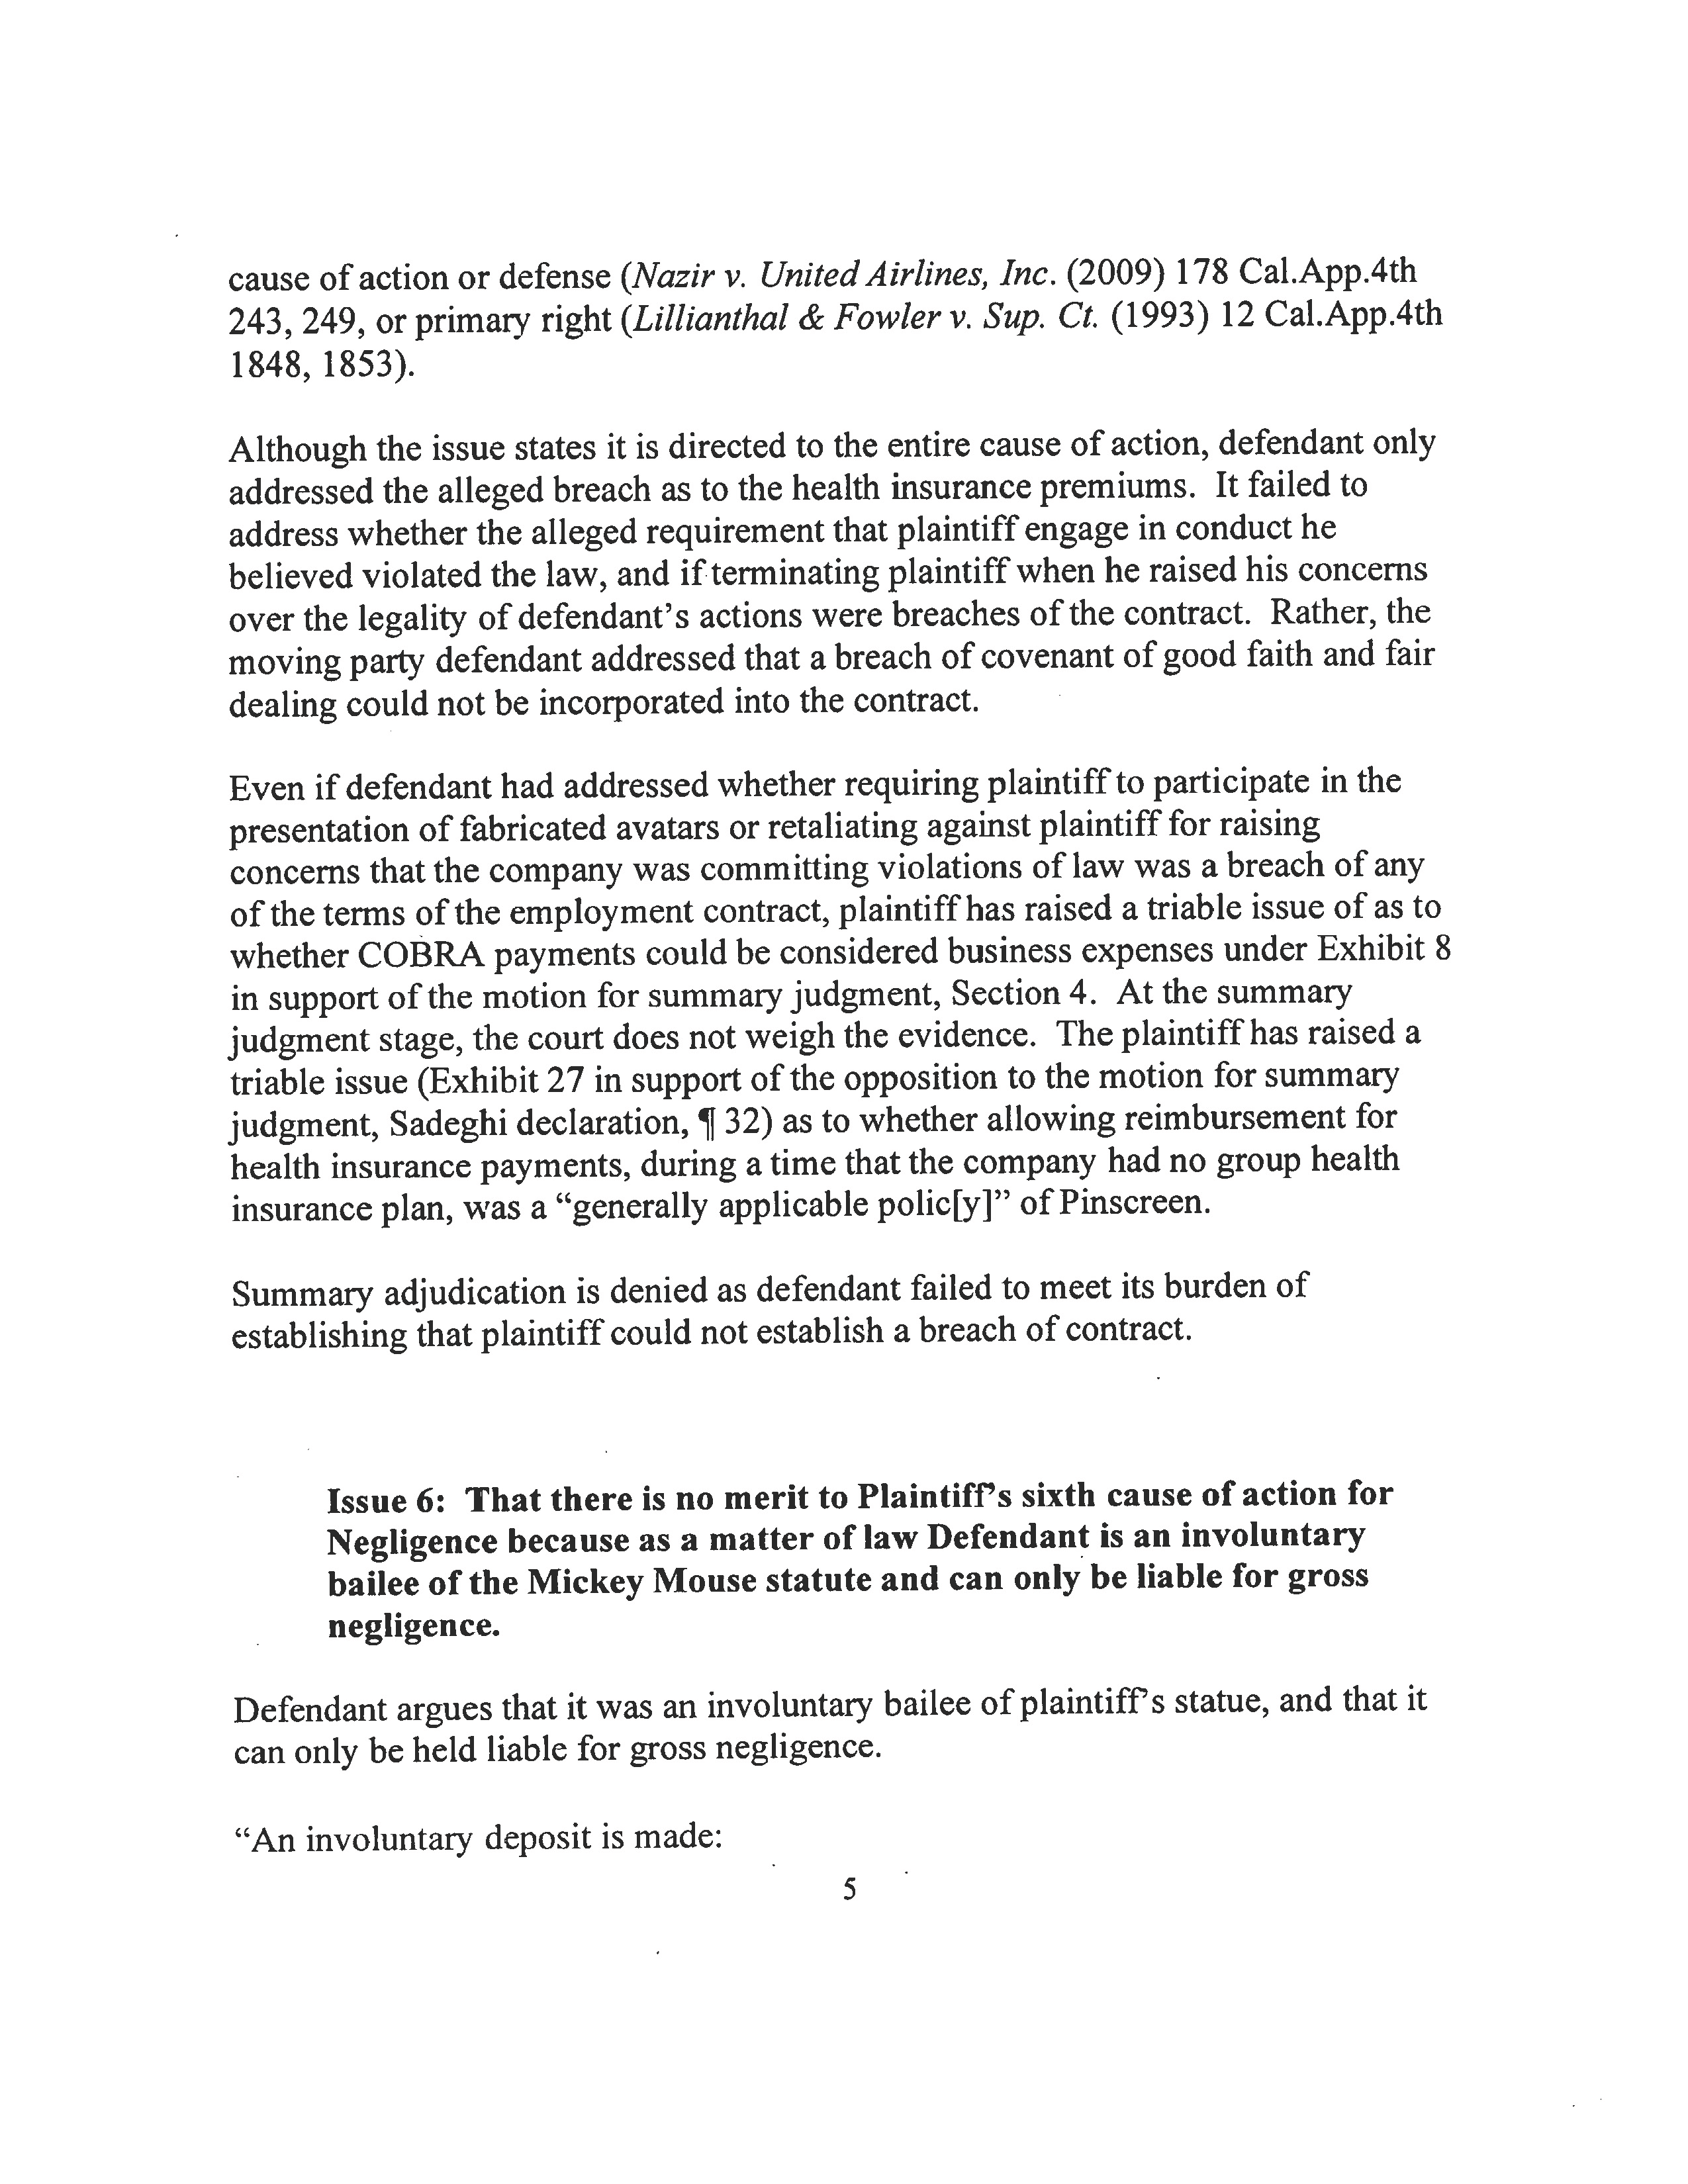 Court Ruling on Pinscreen's and Hao Li's Motion for Summary Judgment - Full Page 5